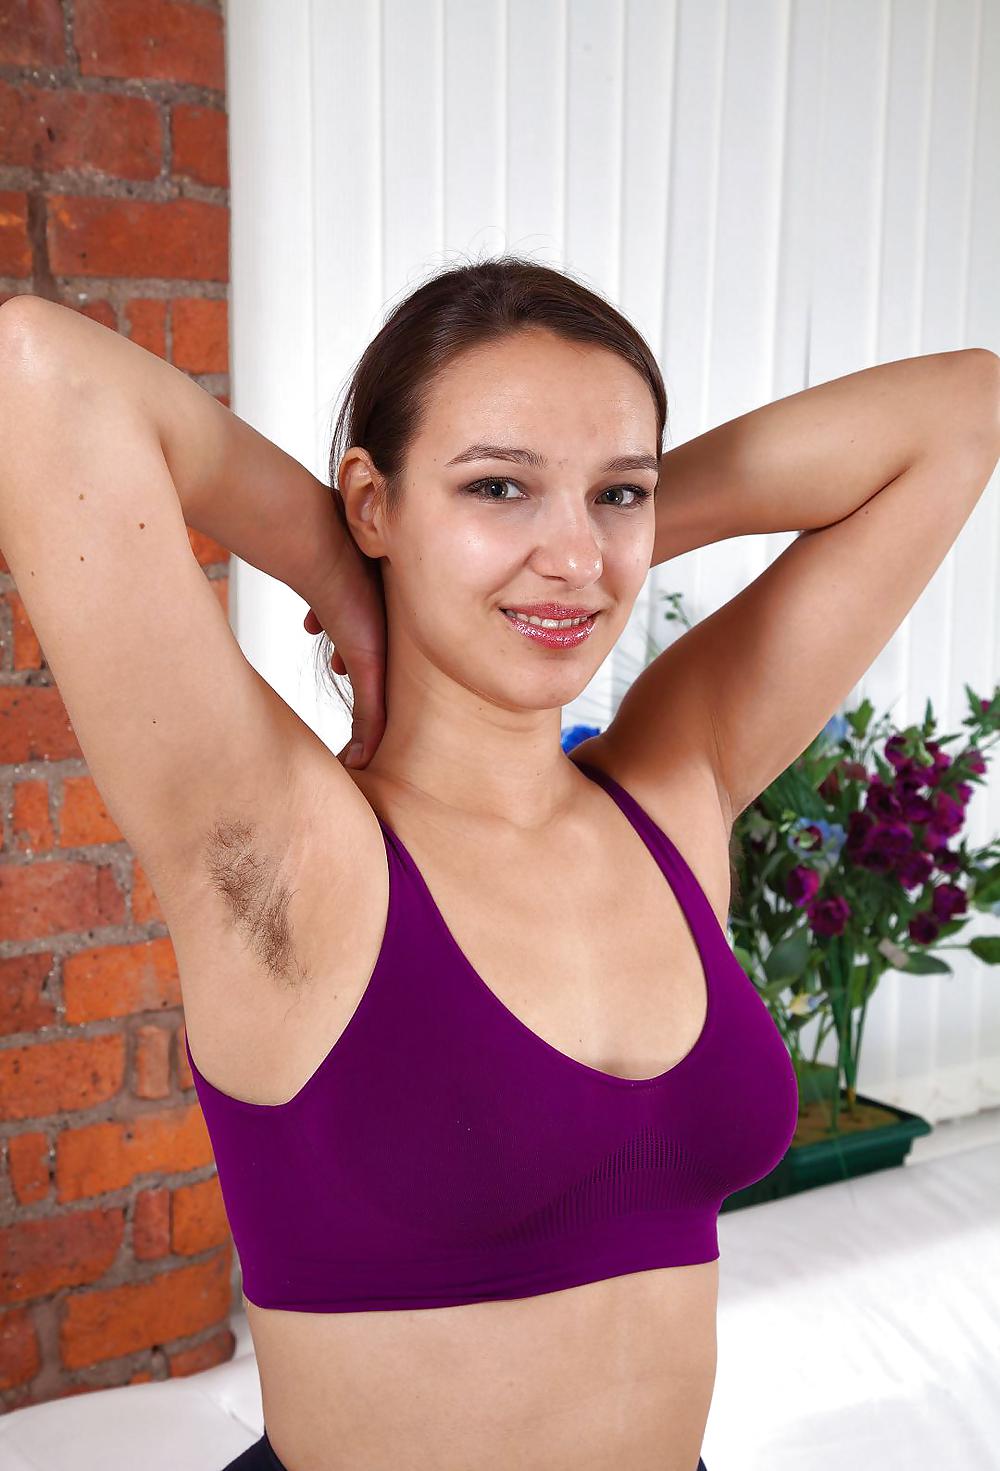 Girls with hairy, unshaven armpits J #21319610